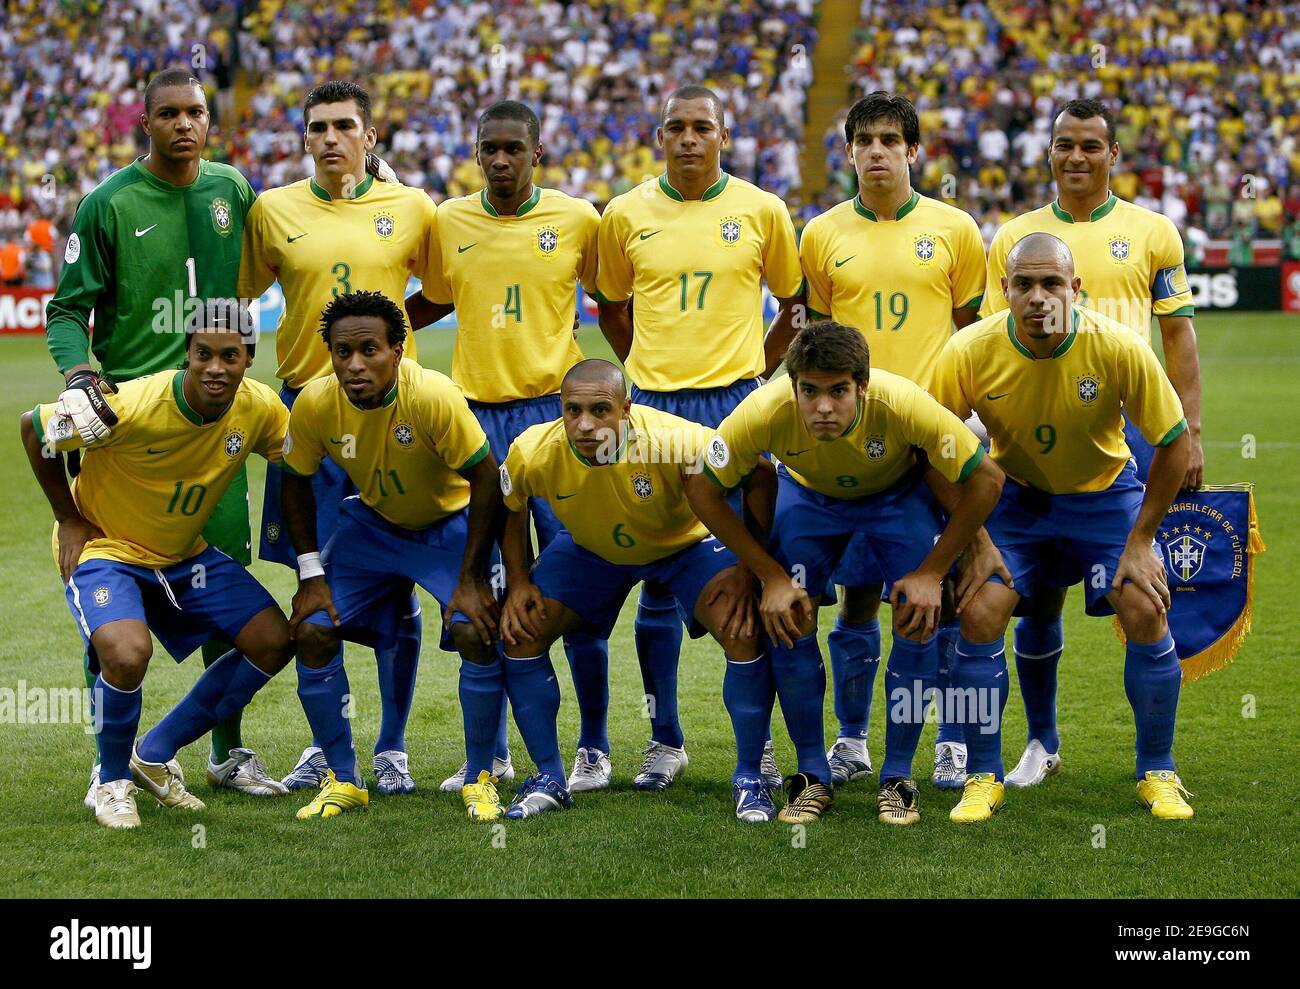 https://c8.alamy.com/comp/2E9GC6N/brazils-soccer-team-during-the-world-cup-2006-quater-final-brazil-vs-france-at-the-commerzbank-arena-stadium-in-frankfurt-germany-on-july-1-2006-france-won-1-0-and-advances-to-world-cup-semifinals-photo-by-christian-liewigabacapresscom-2E9GC6N.jpg